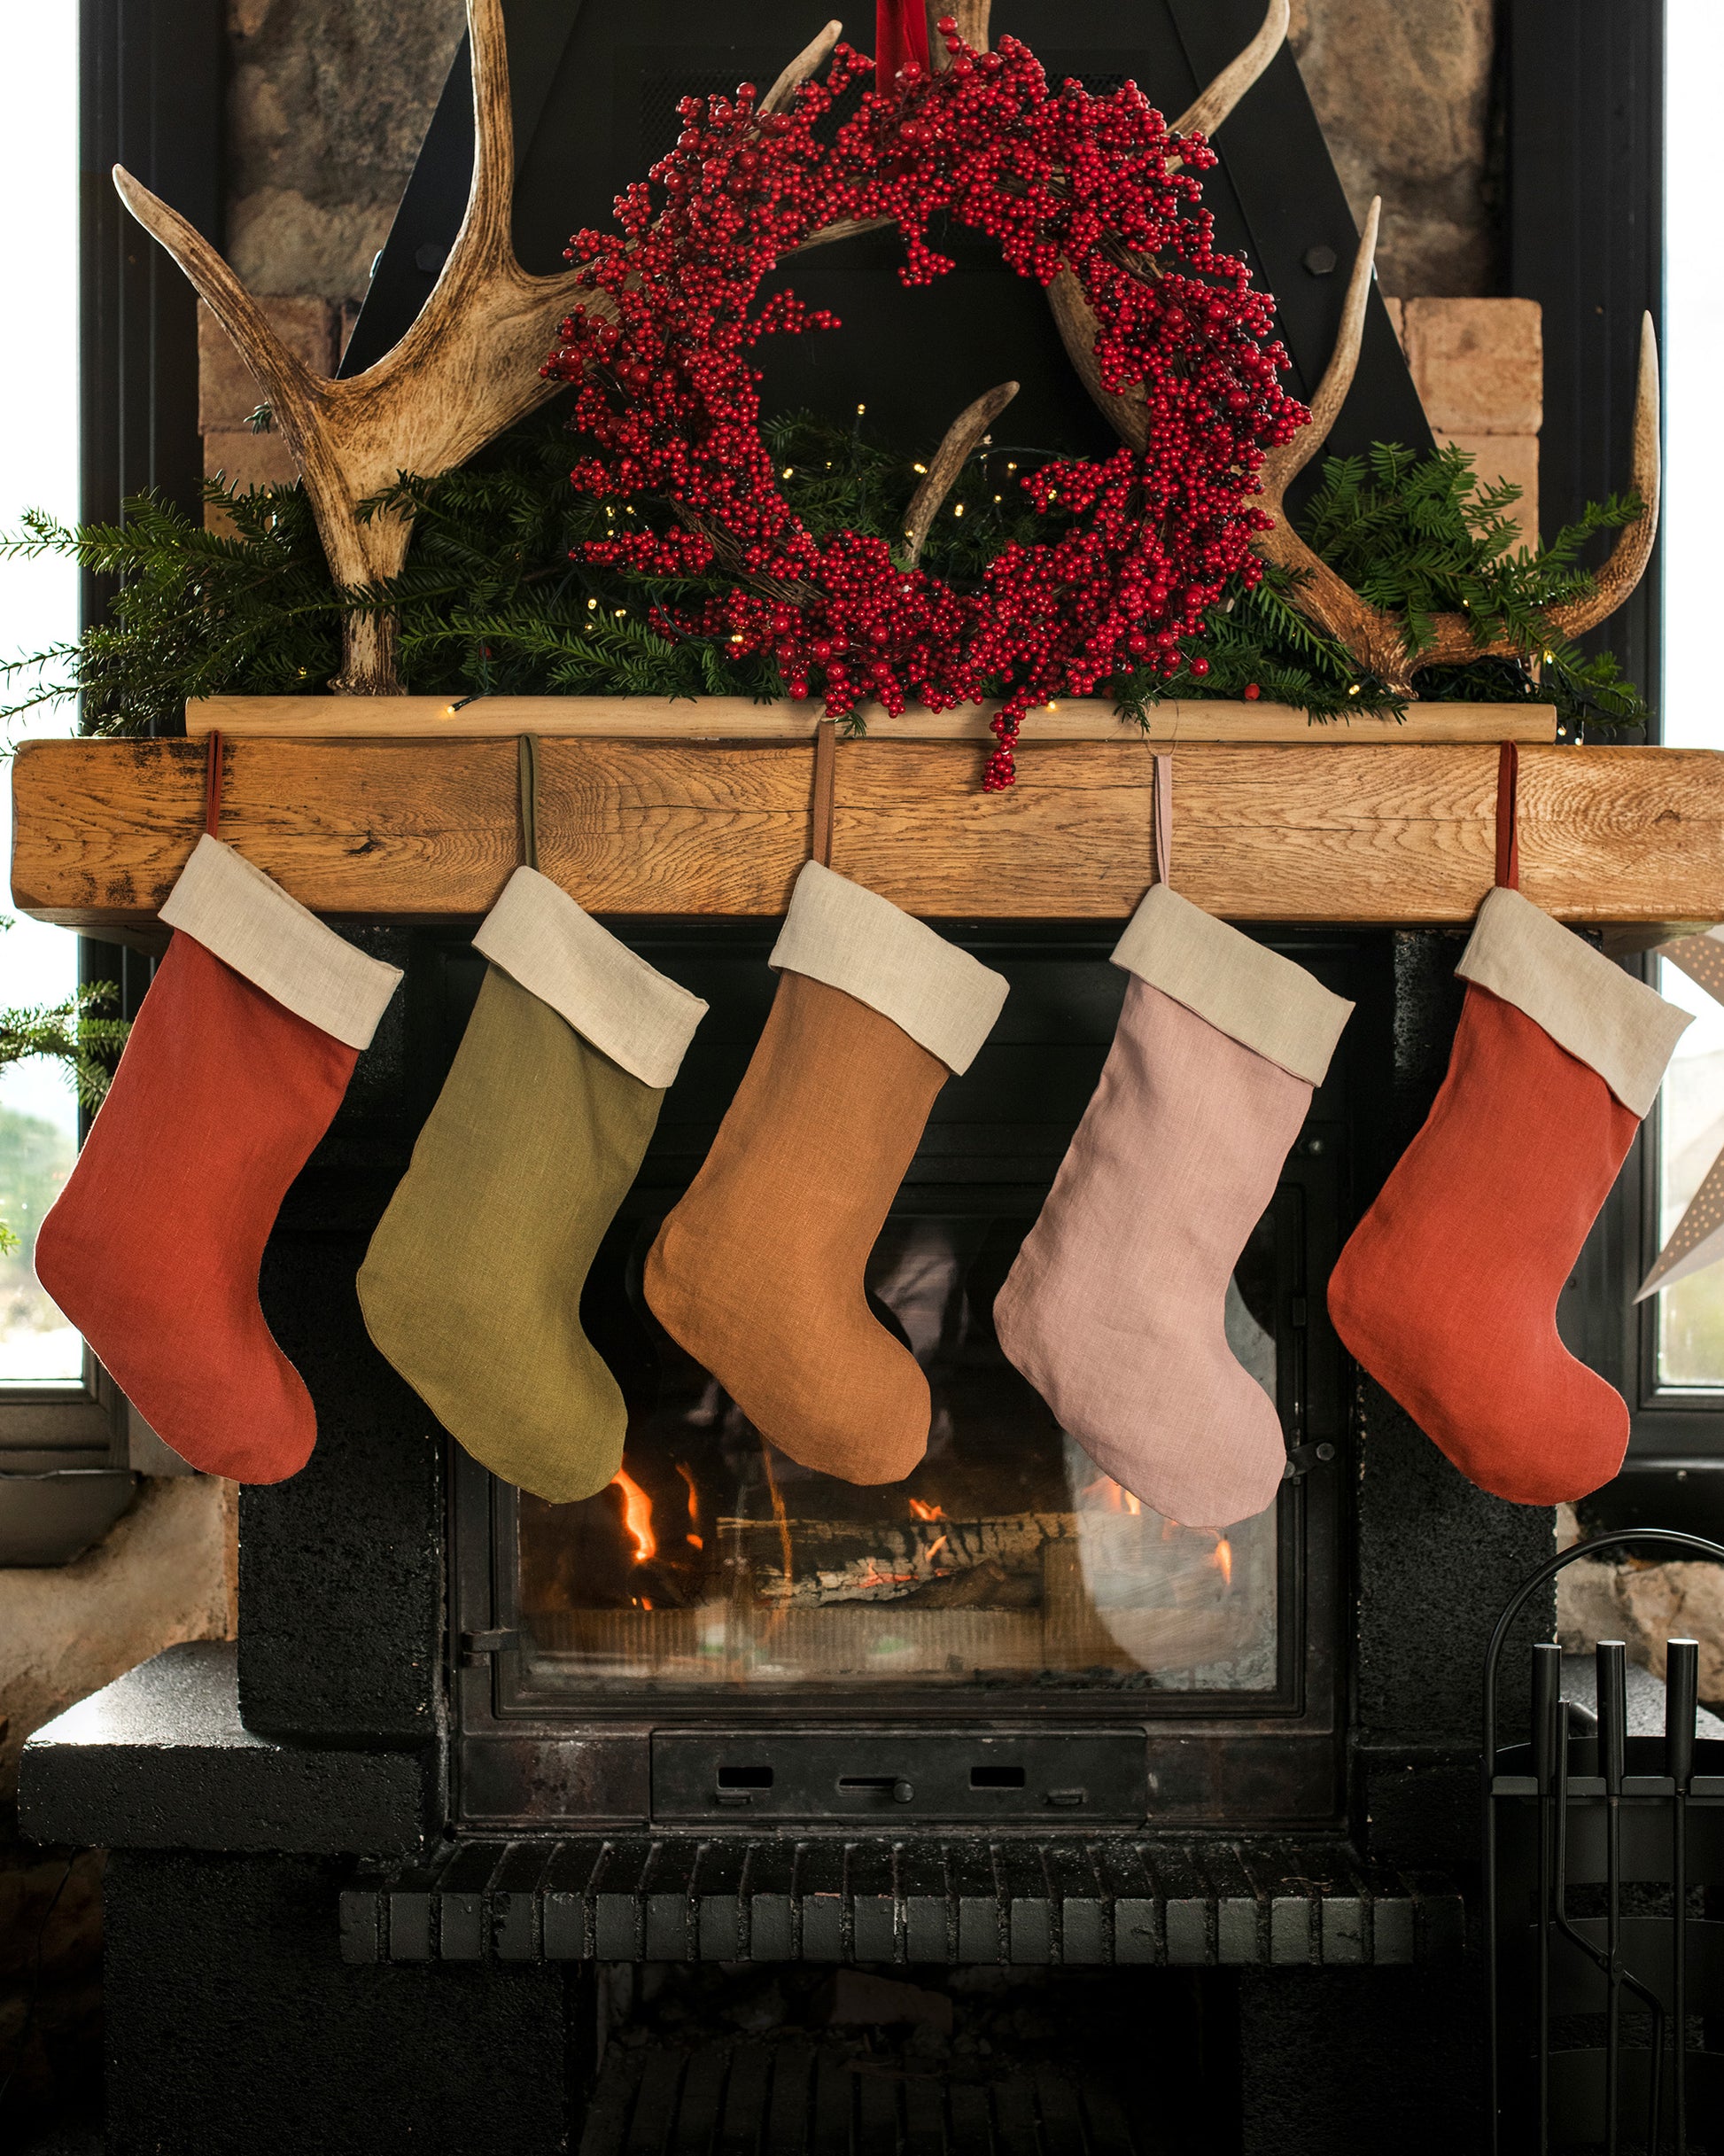 Christmas Stocking in Woodrose - MagicLinen